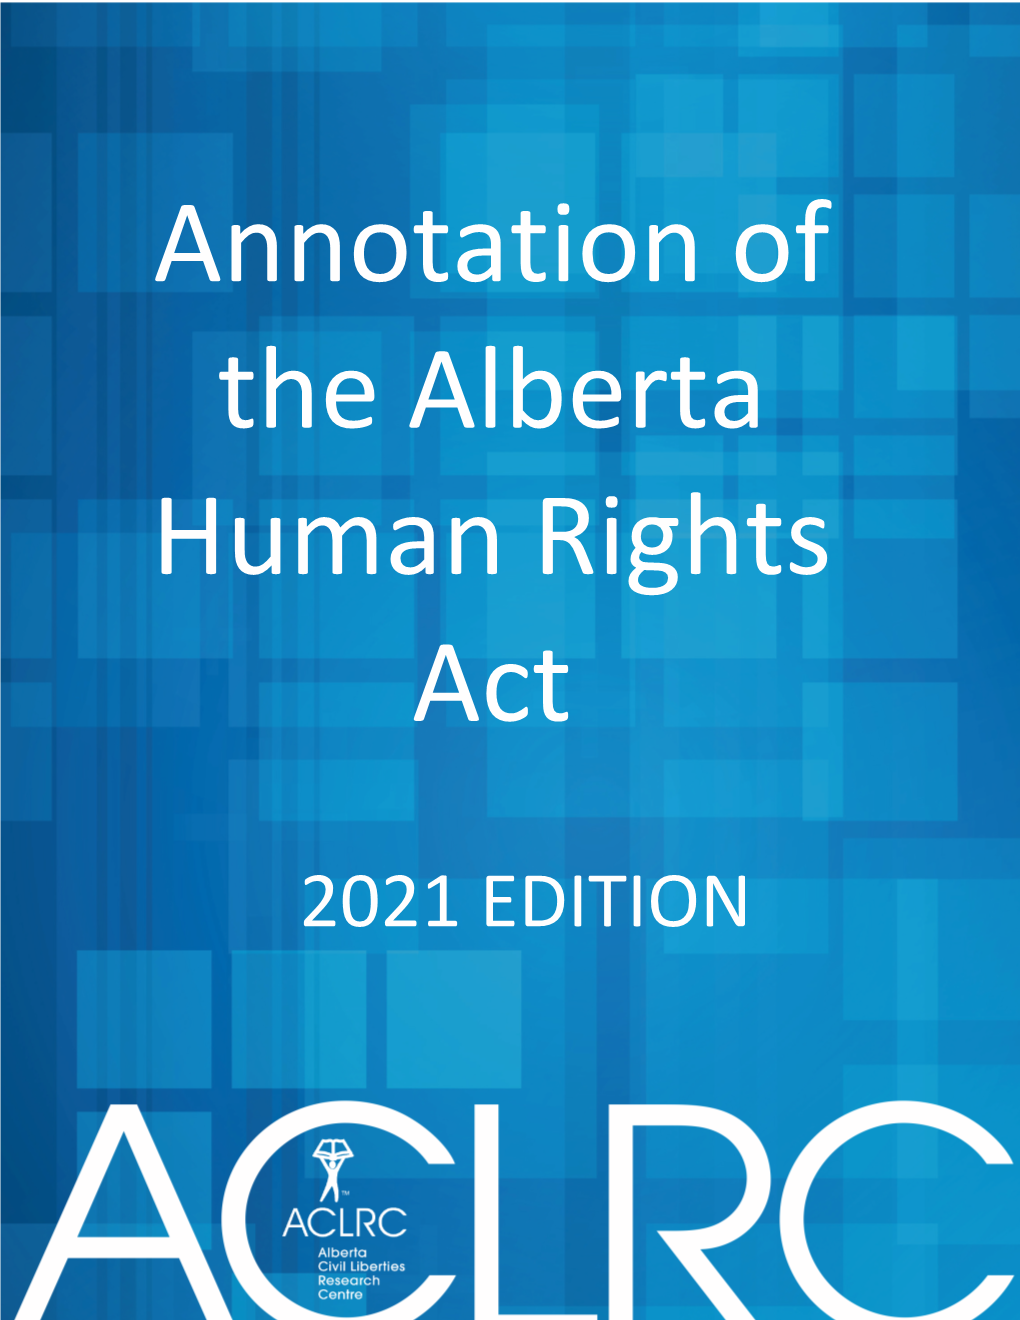 Annotation of Human Rights 2021